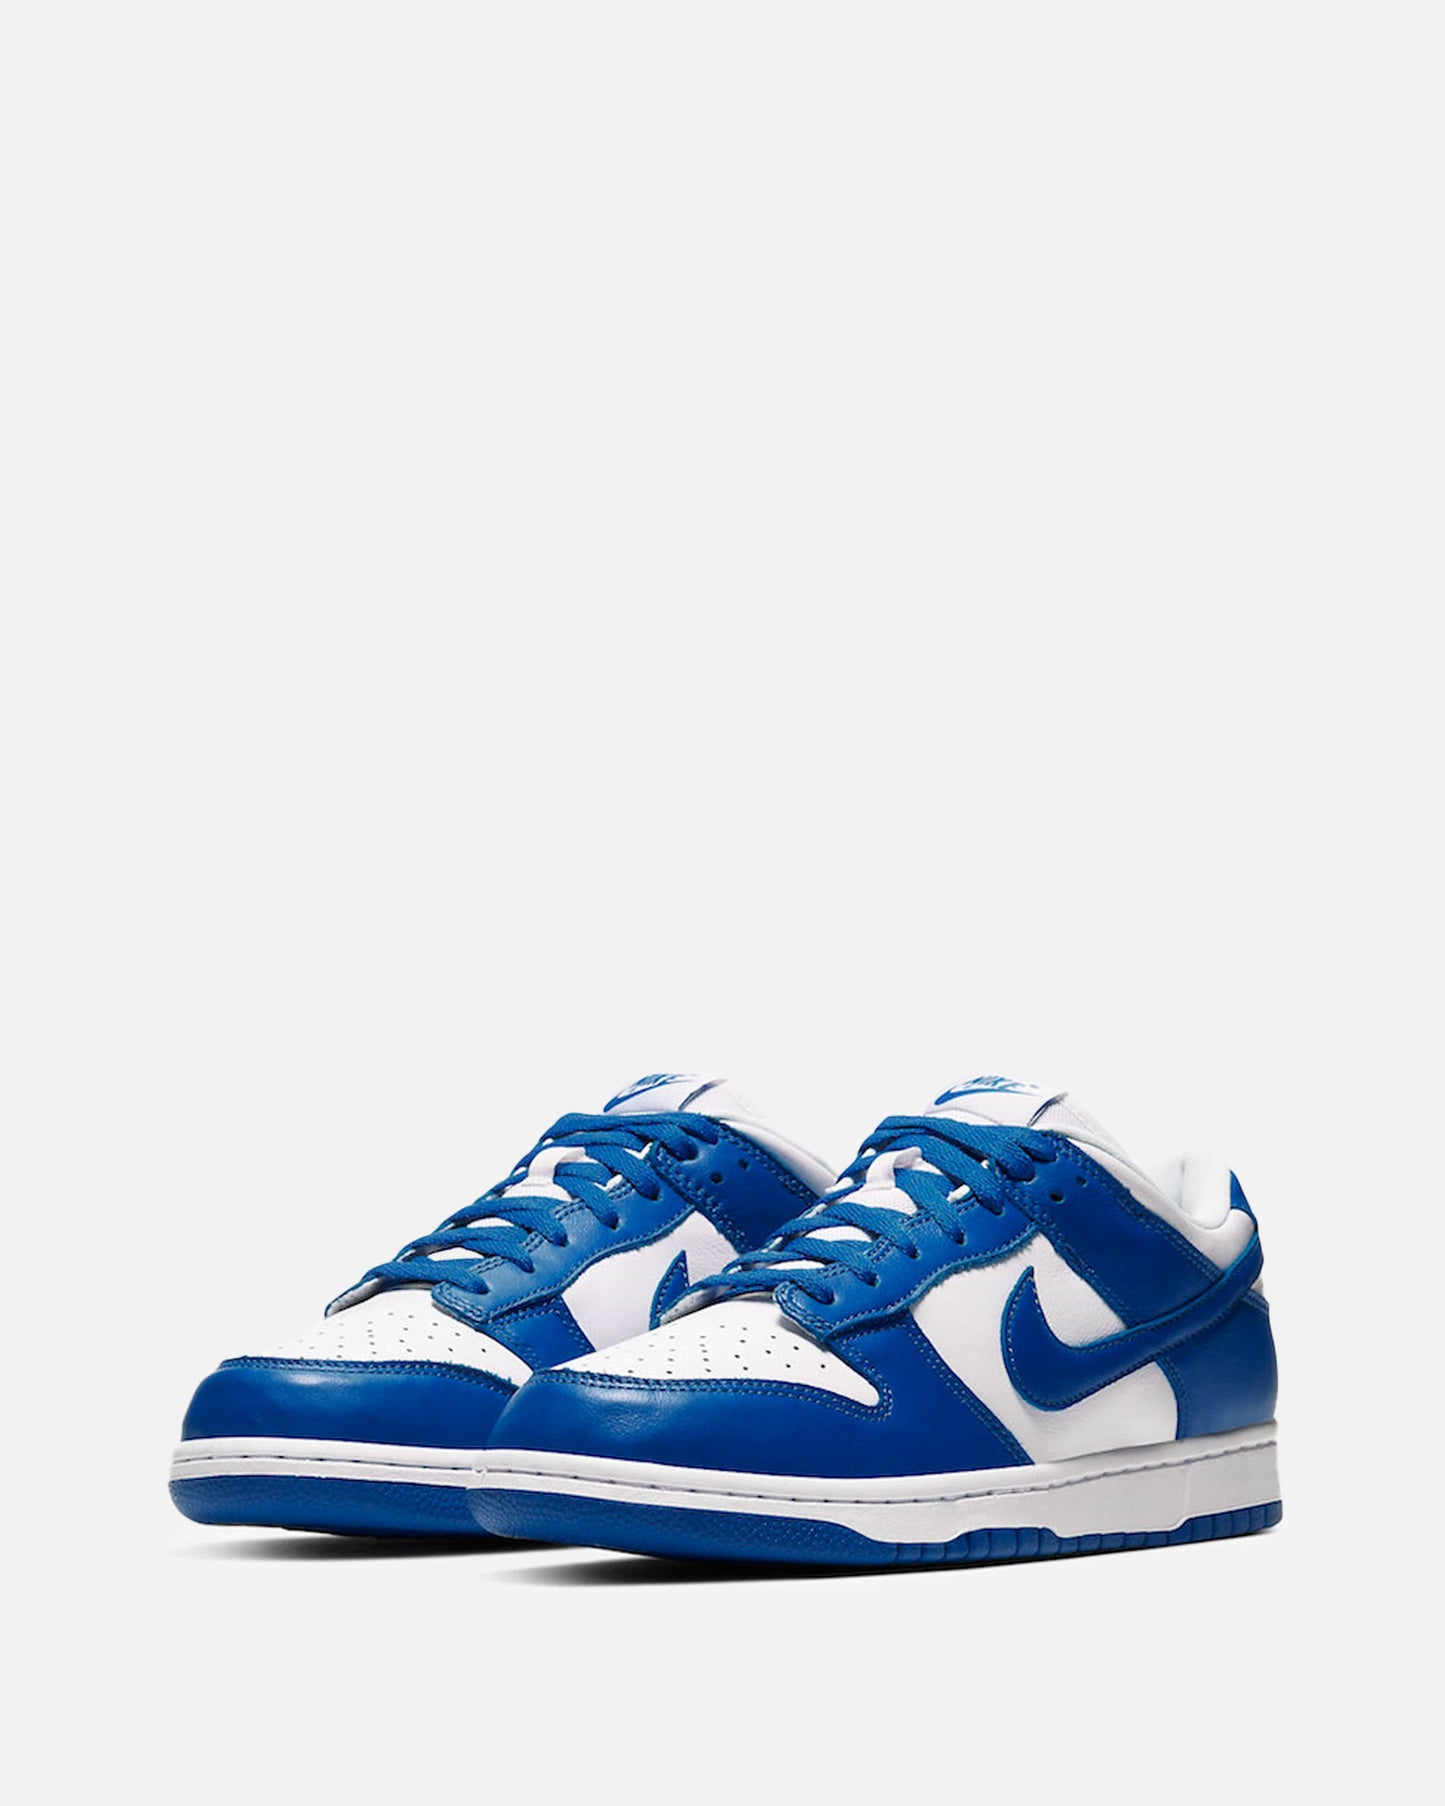 Nike Releases Dunk Low 'Varsity Royal'